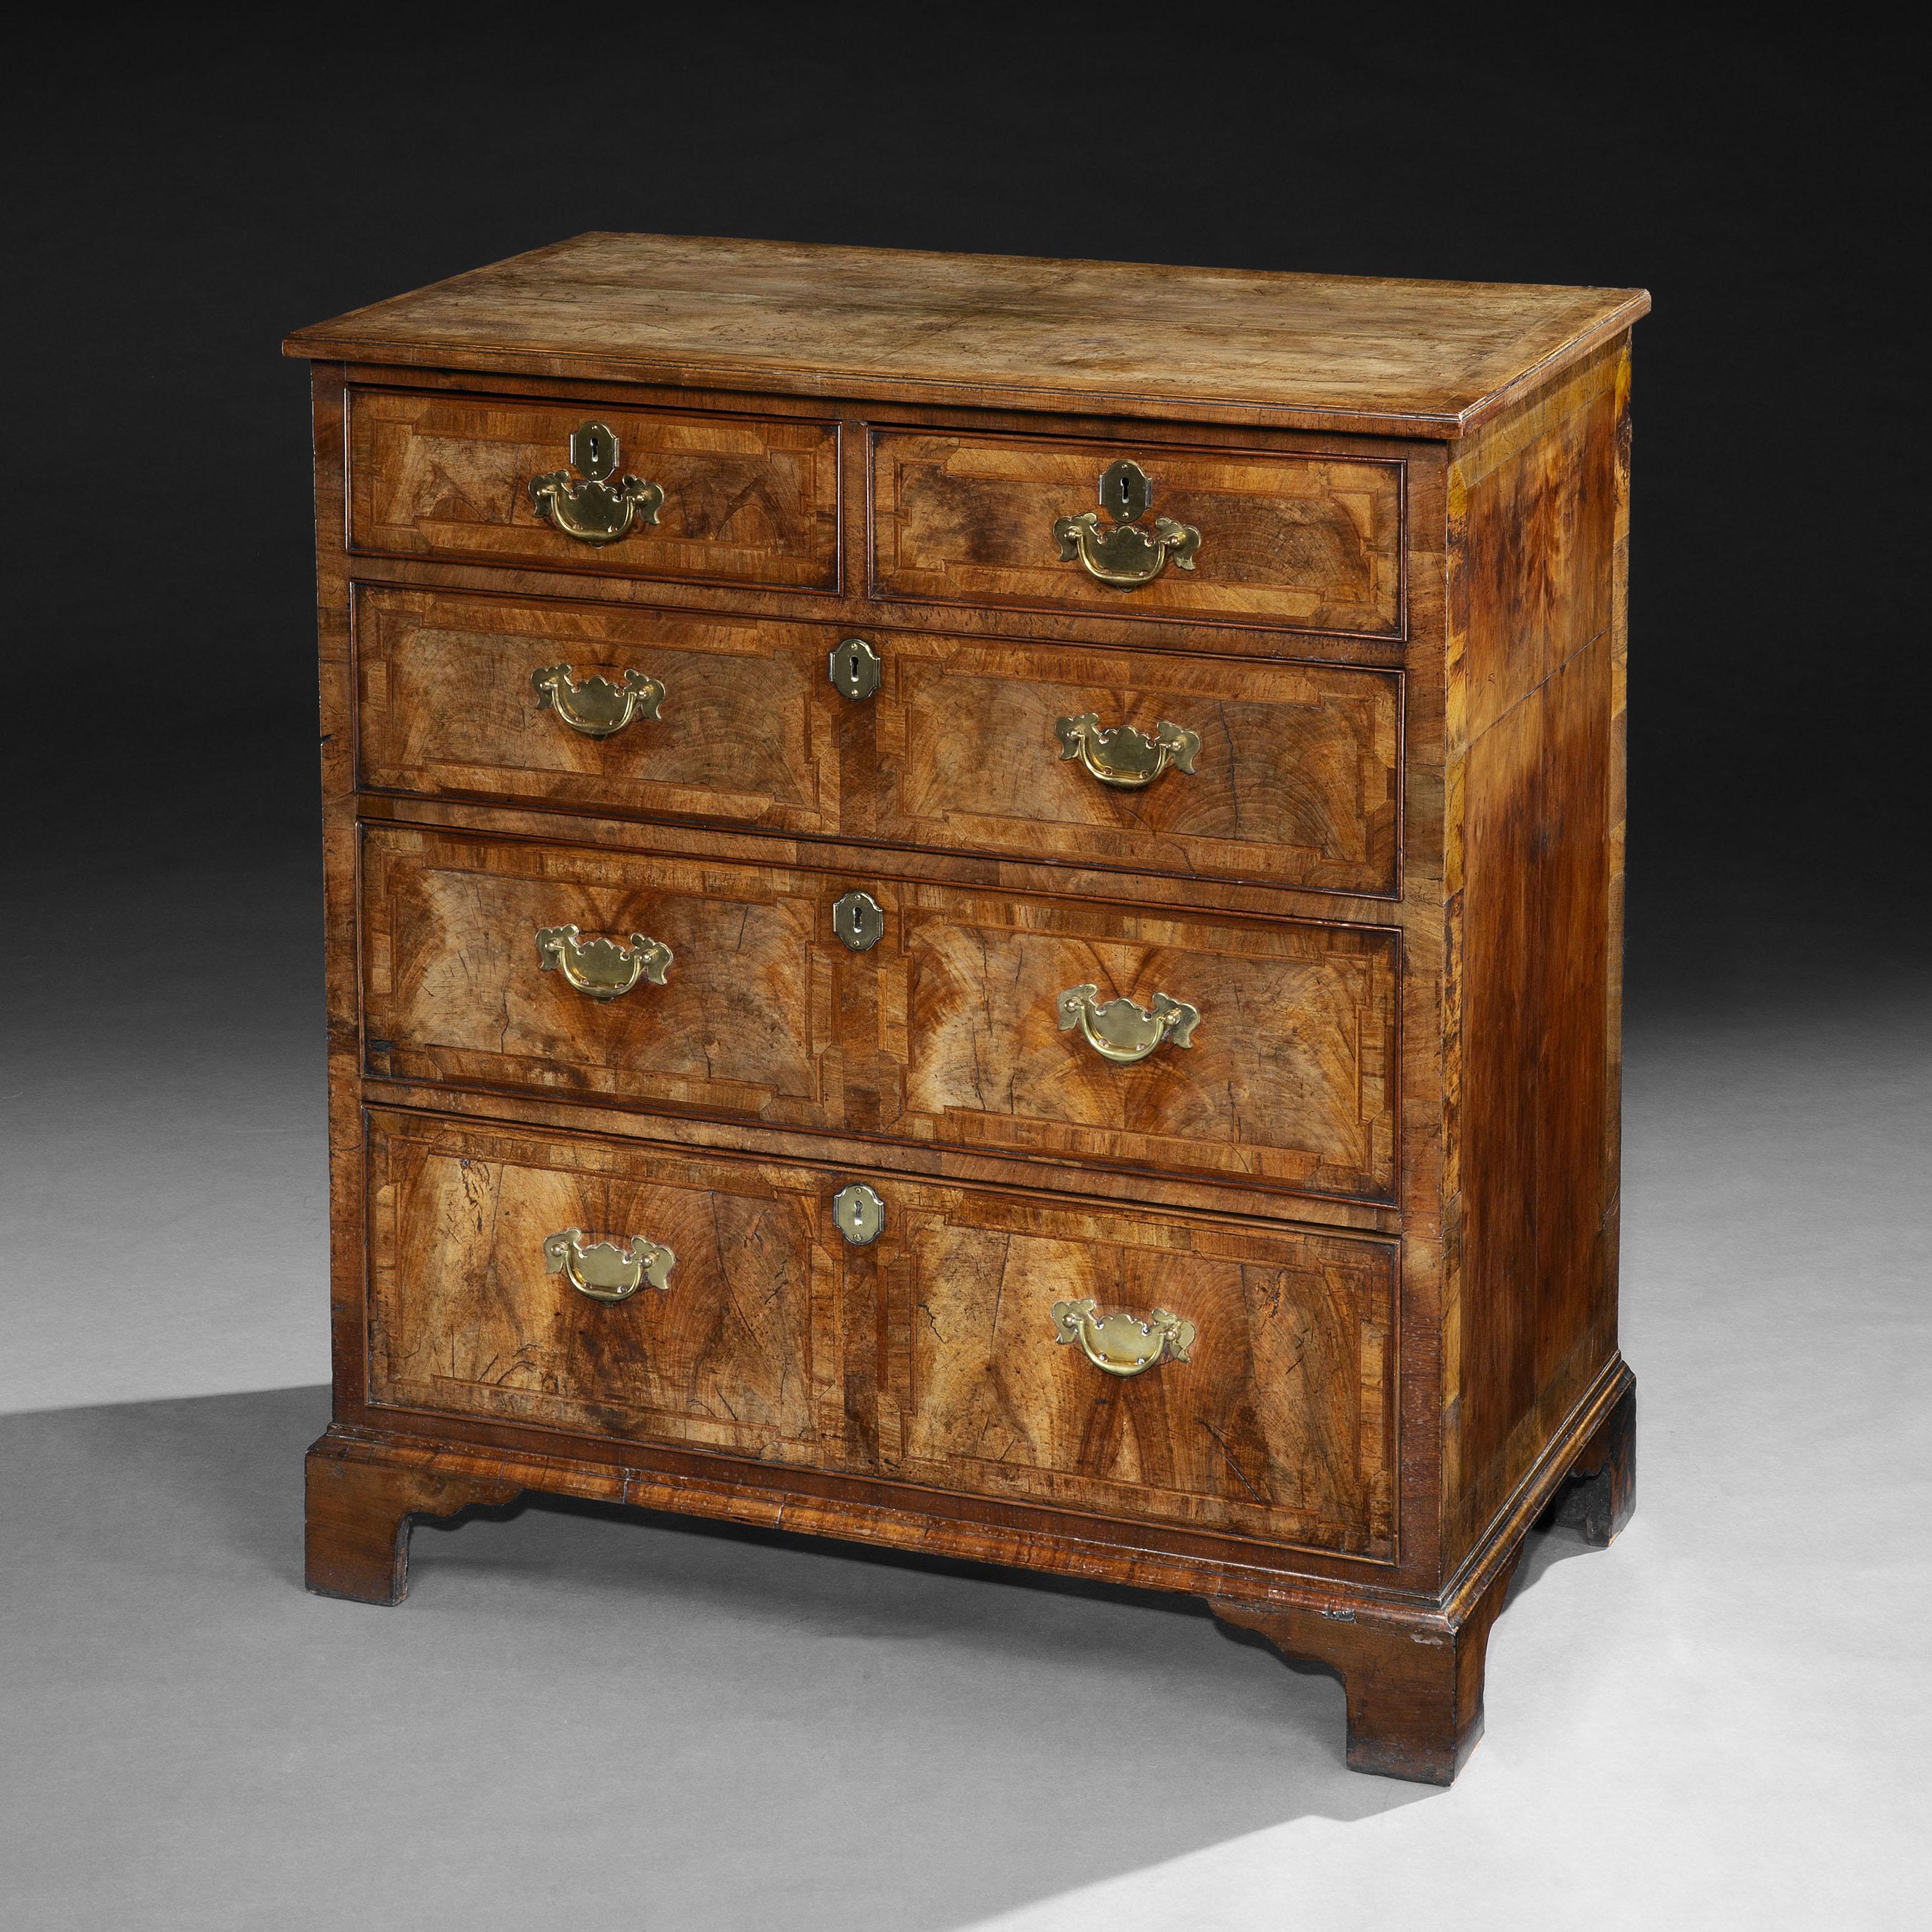 English, circa 1720.

A very fine early eighteenth century walnut chest of drawers of exceptional colour and patination, with quarter veneered top and re-entrant corners. Two small draws sit above three large draws, all raised on bracket